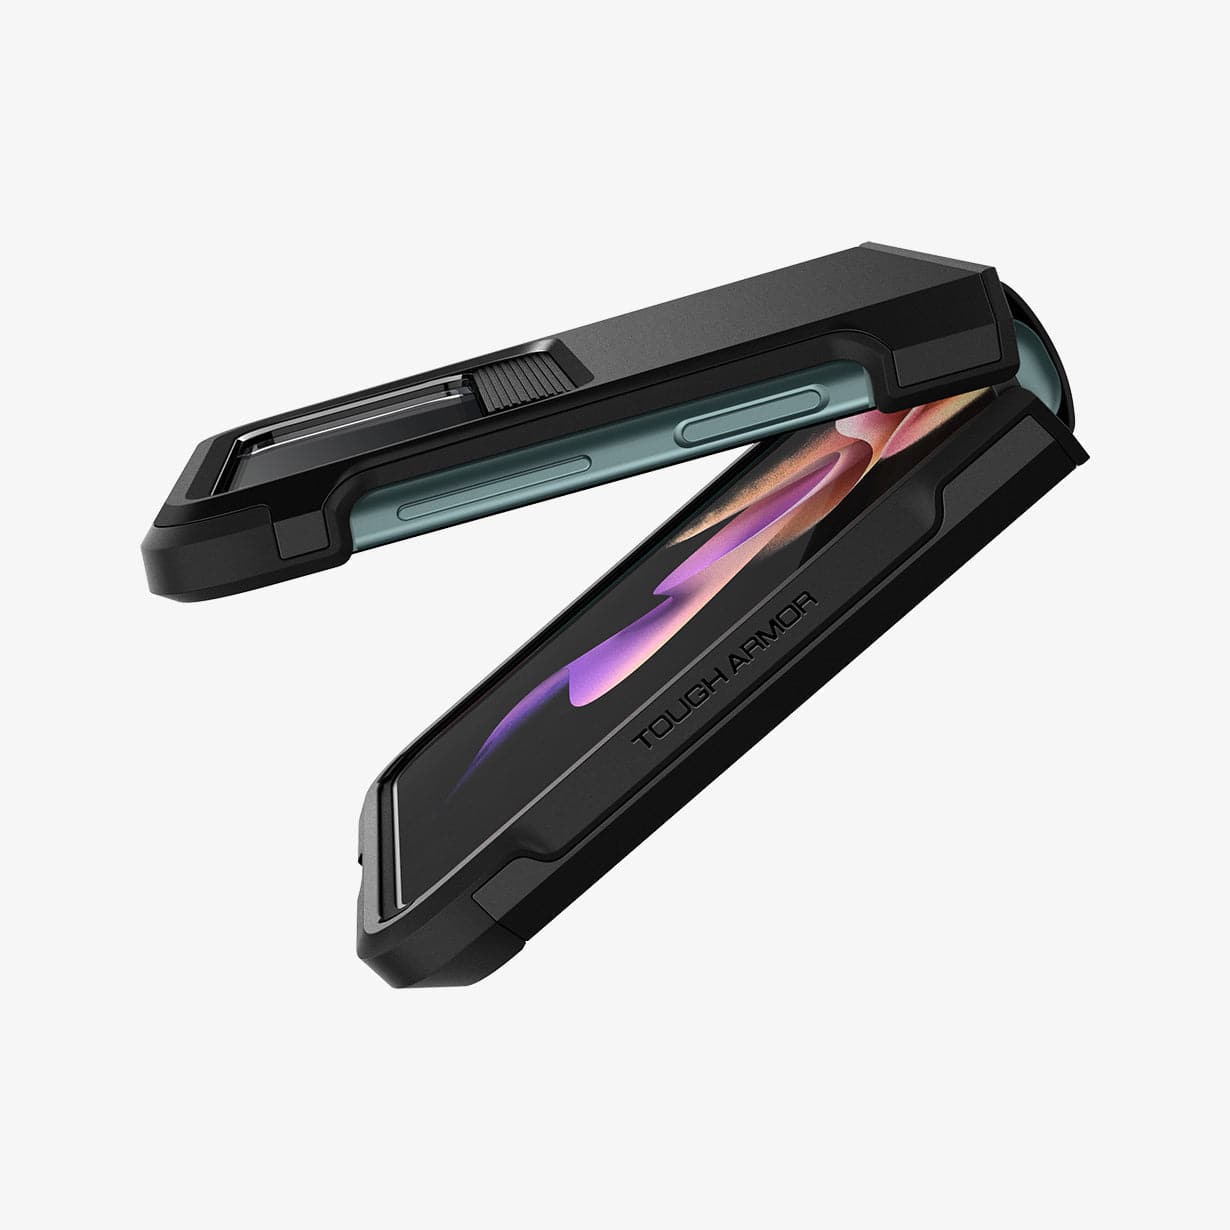 ACS03082 - Galaxy Z Flip 3 Case Tough Armor in black showing the side with device partially closed